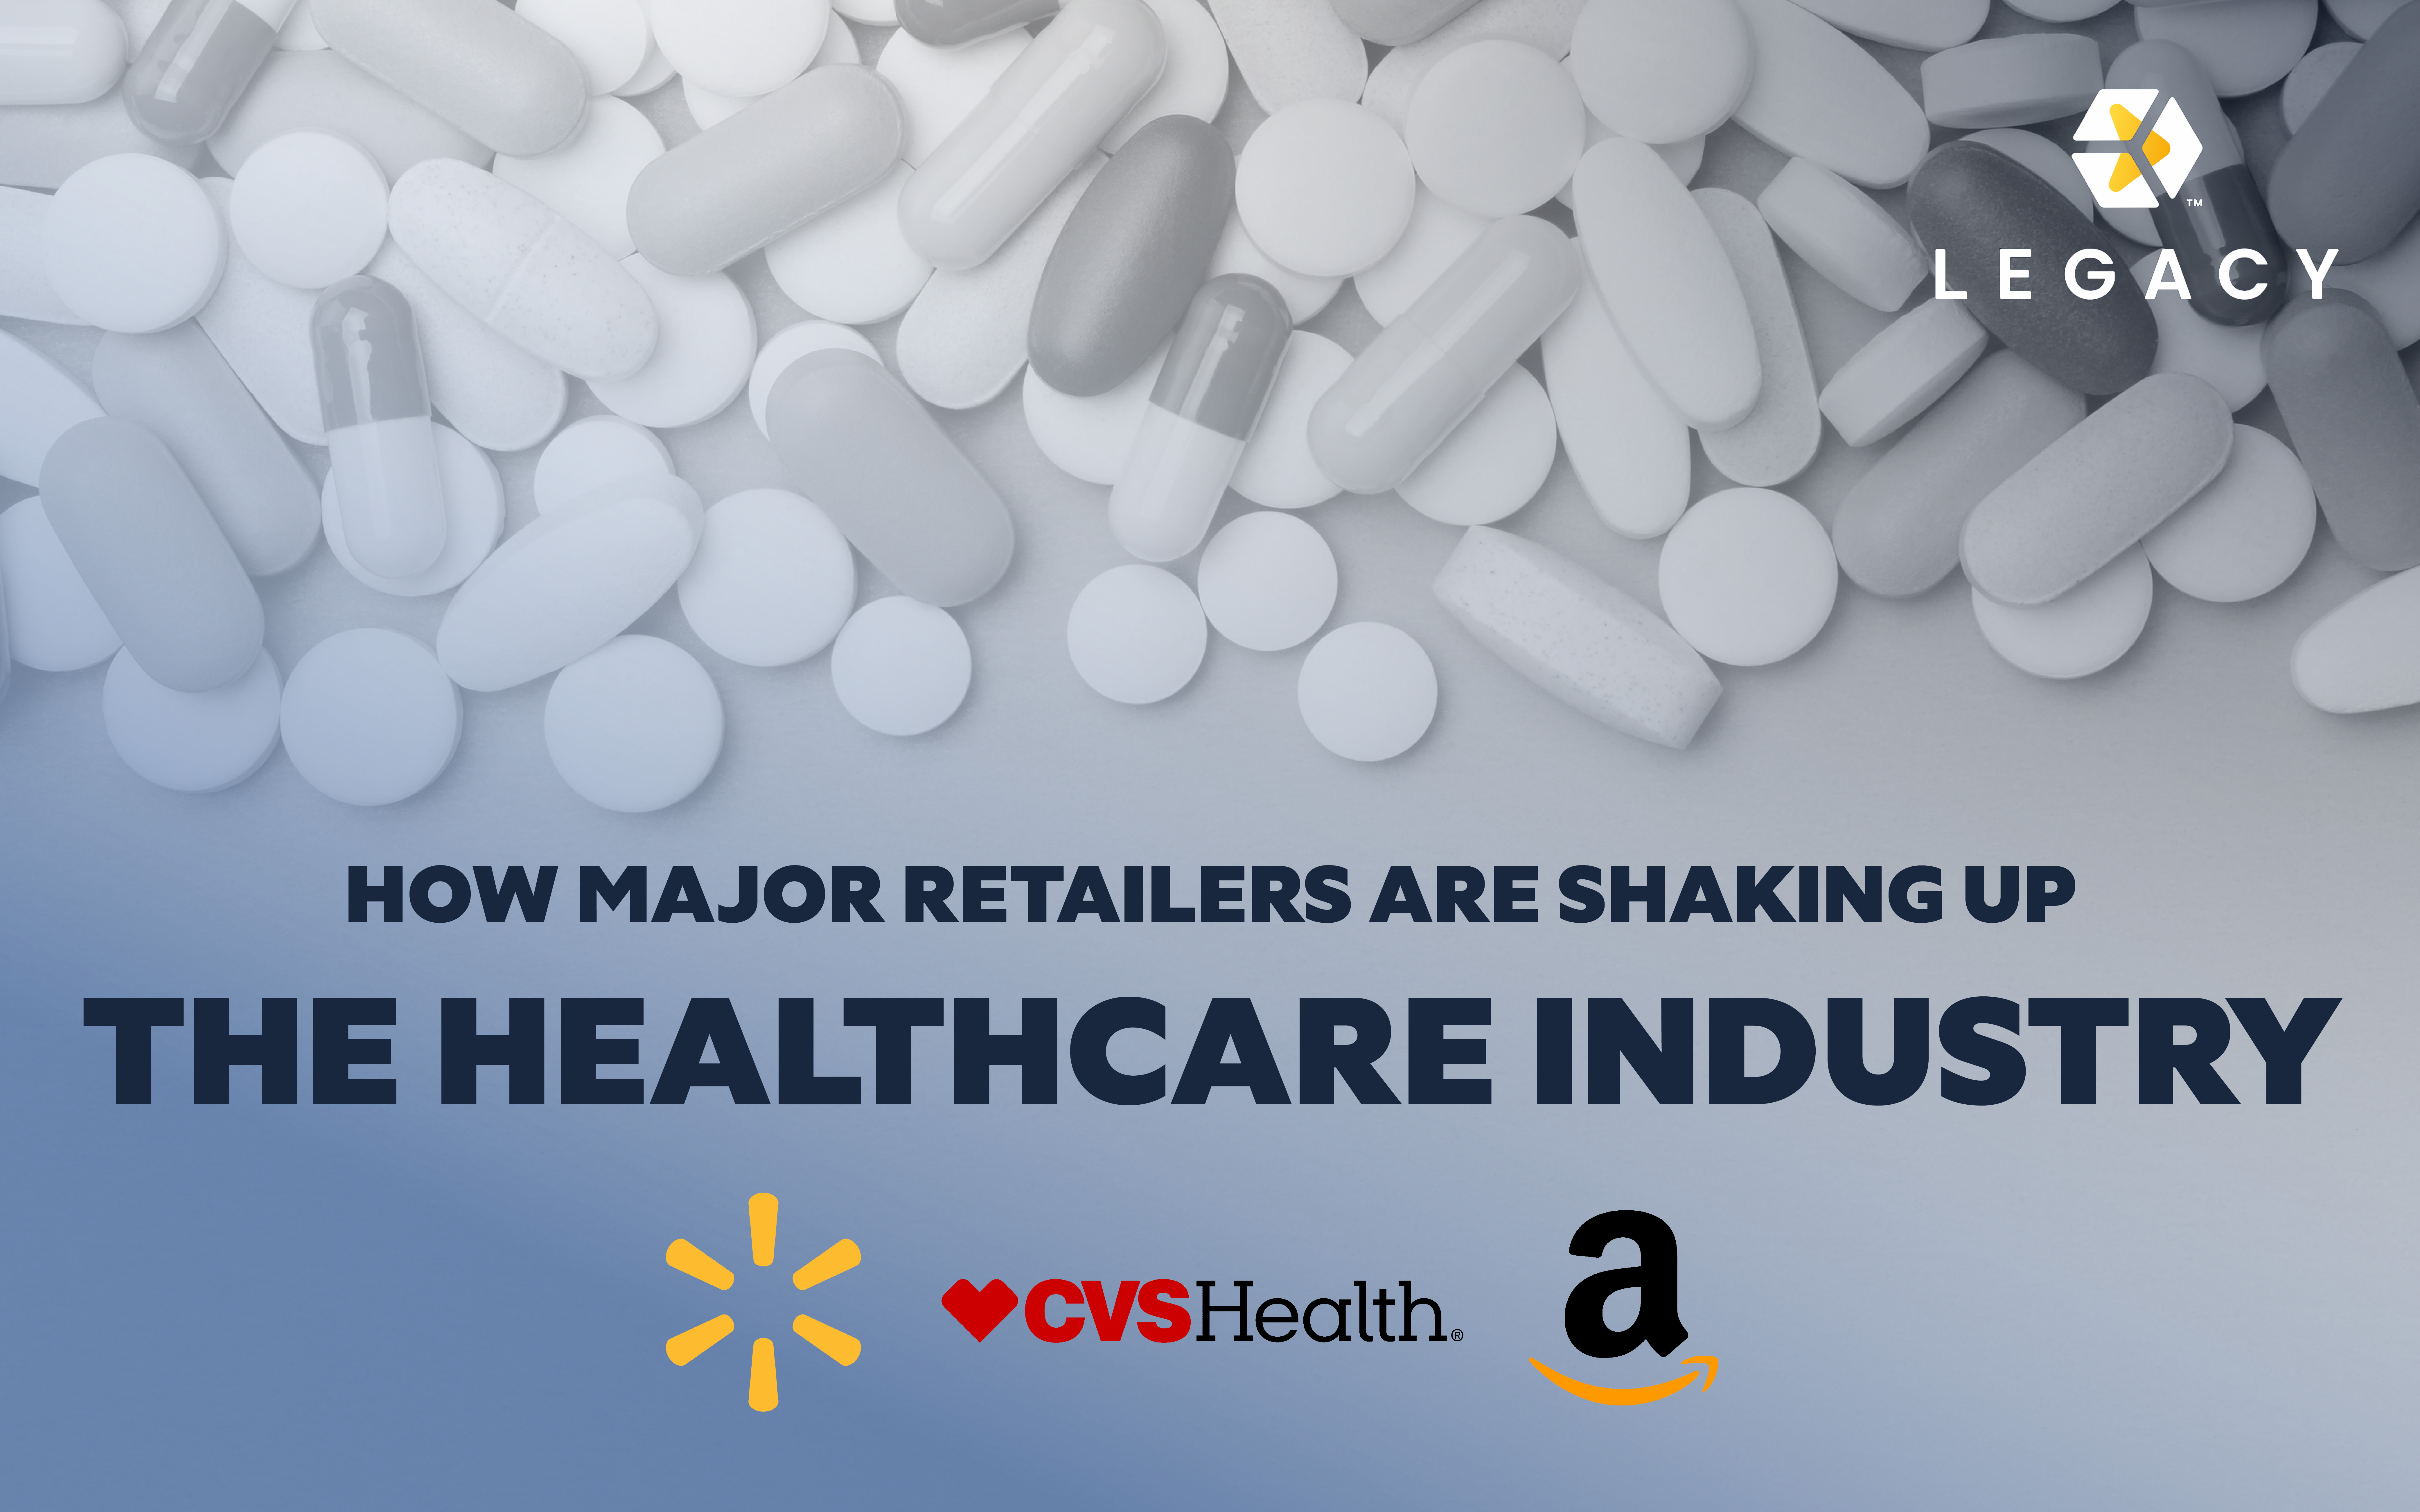 How Major Retailers Are Shaking Up the Healthcare Industry